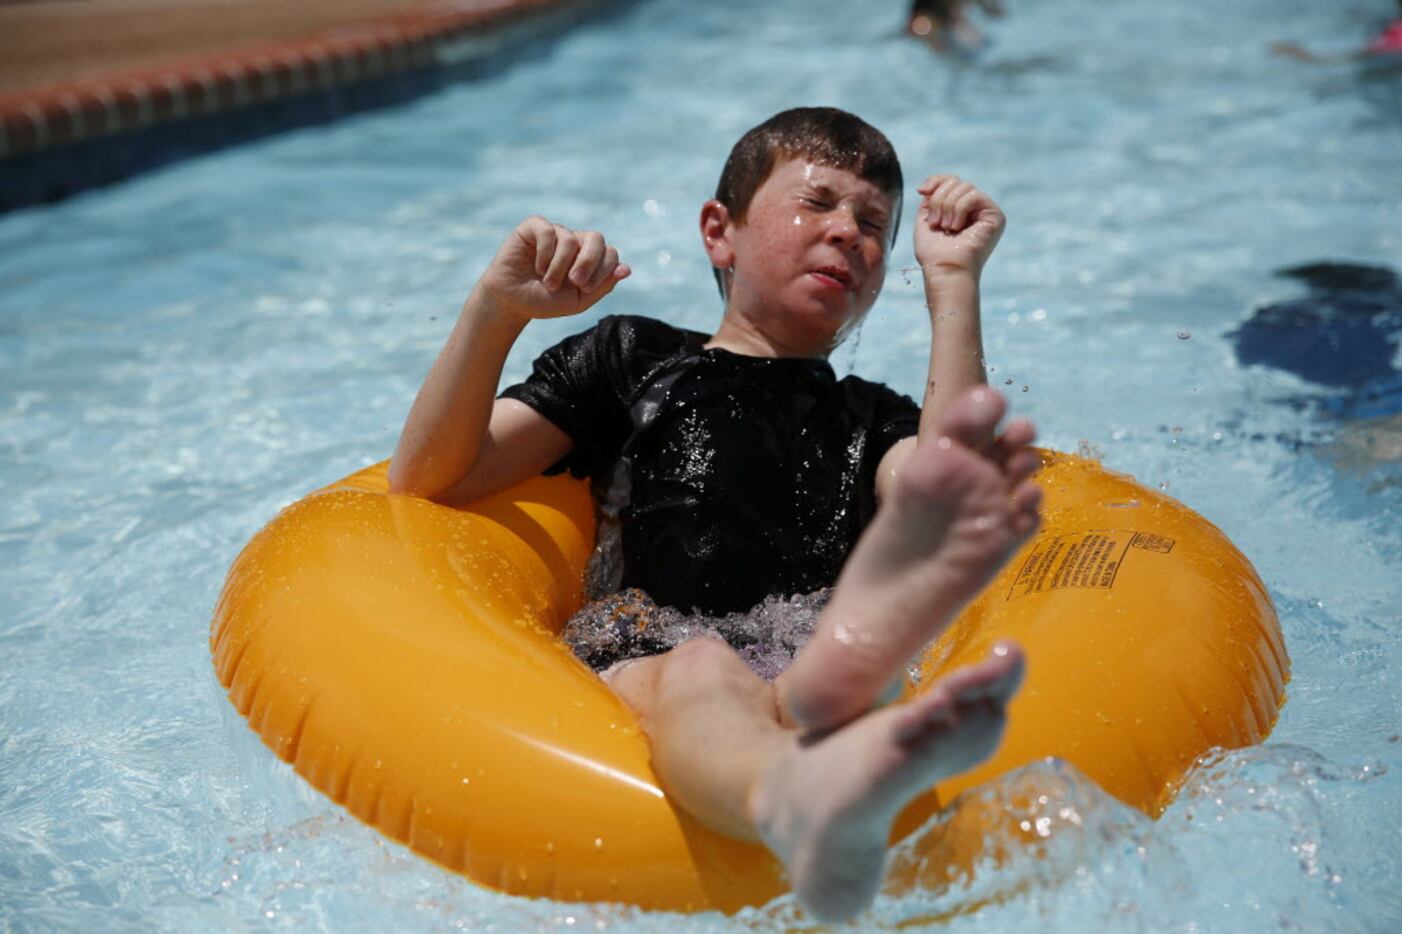 Matthew Olson, 11, of Plano, settles on a tube while swimming during an Independence Day...